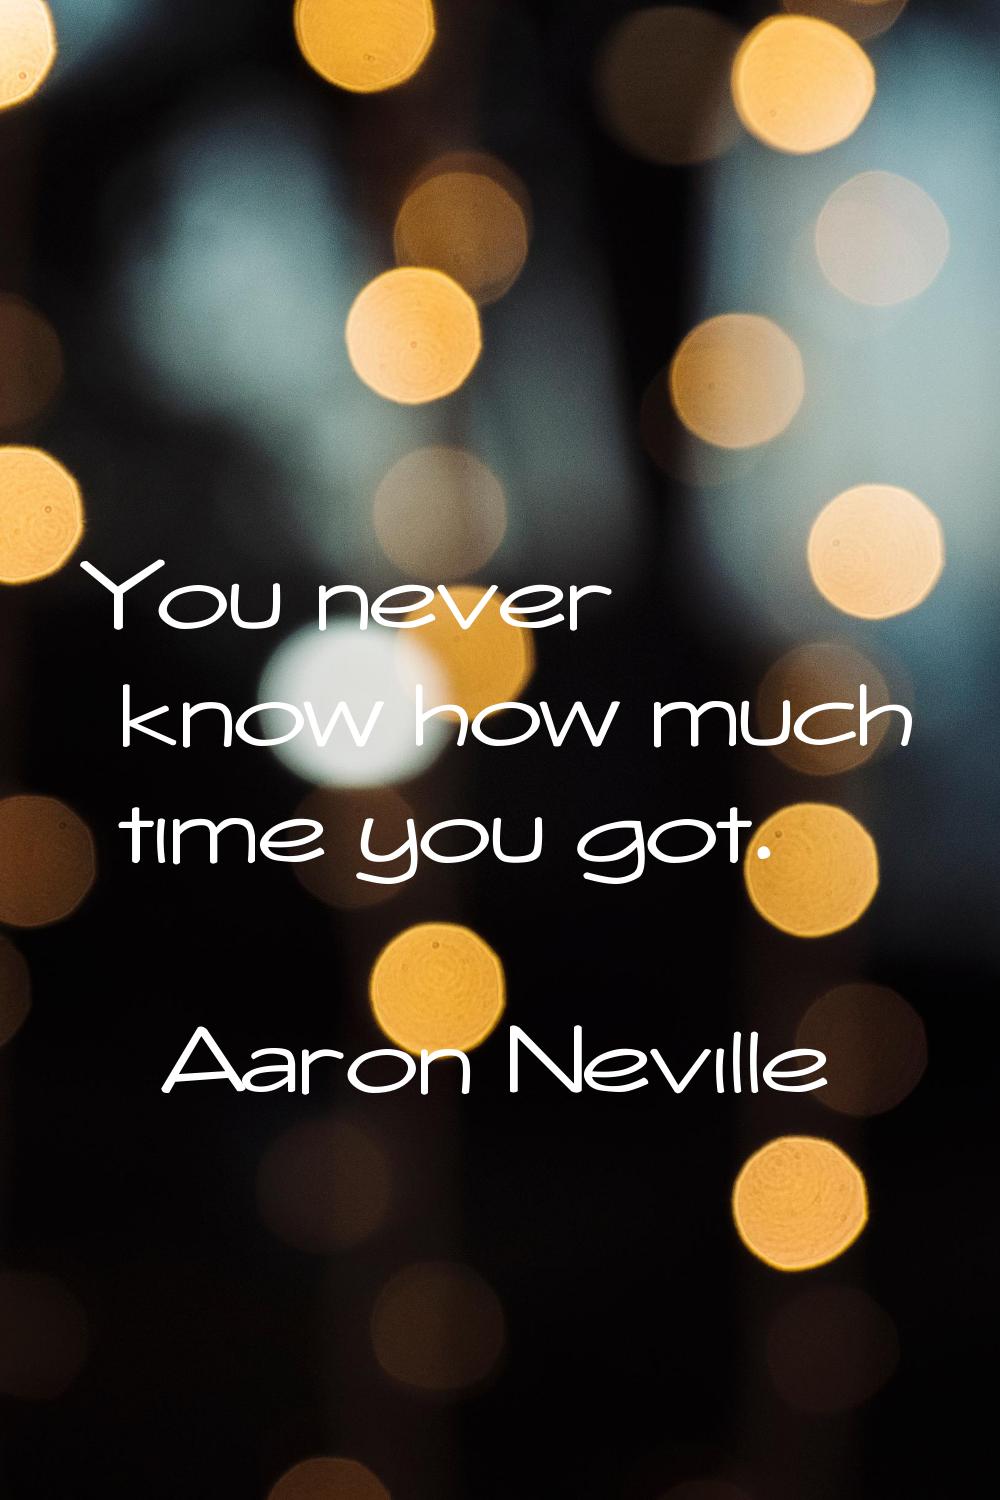 You never know how much time you got.